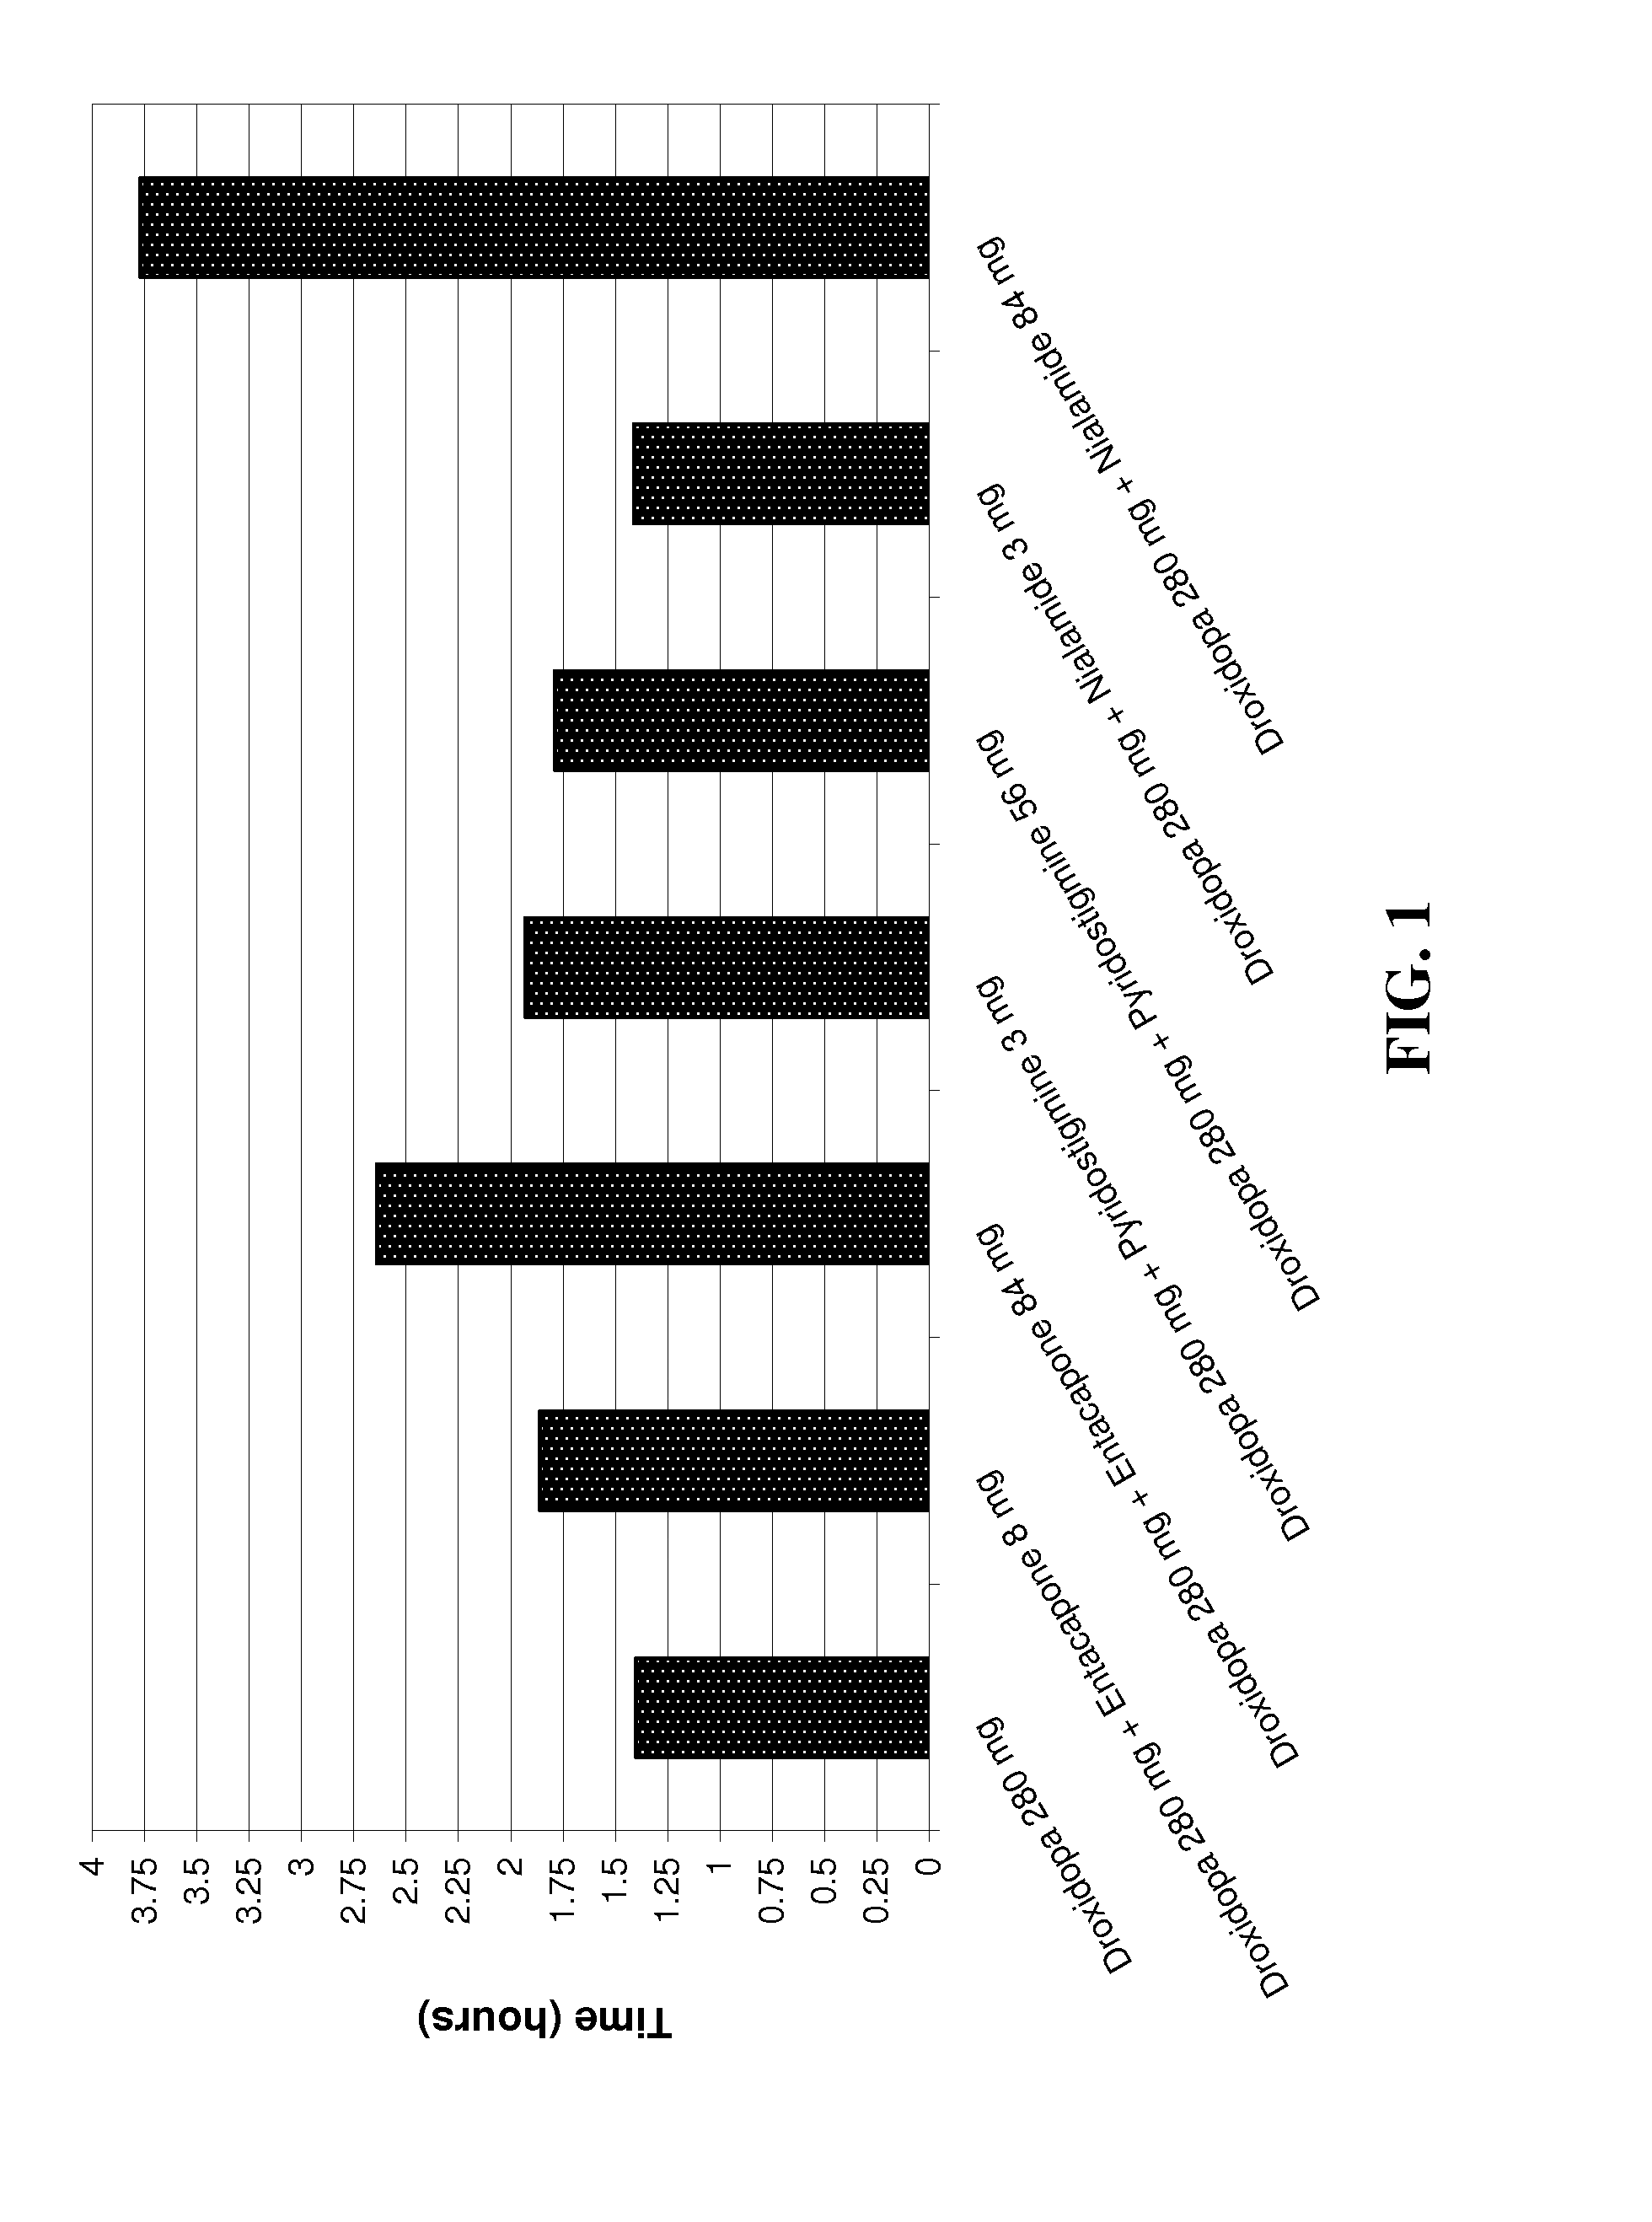 Pharmaceutical compositions comprising droxidopa